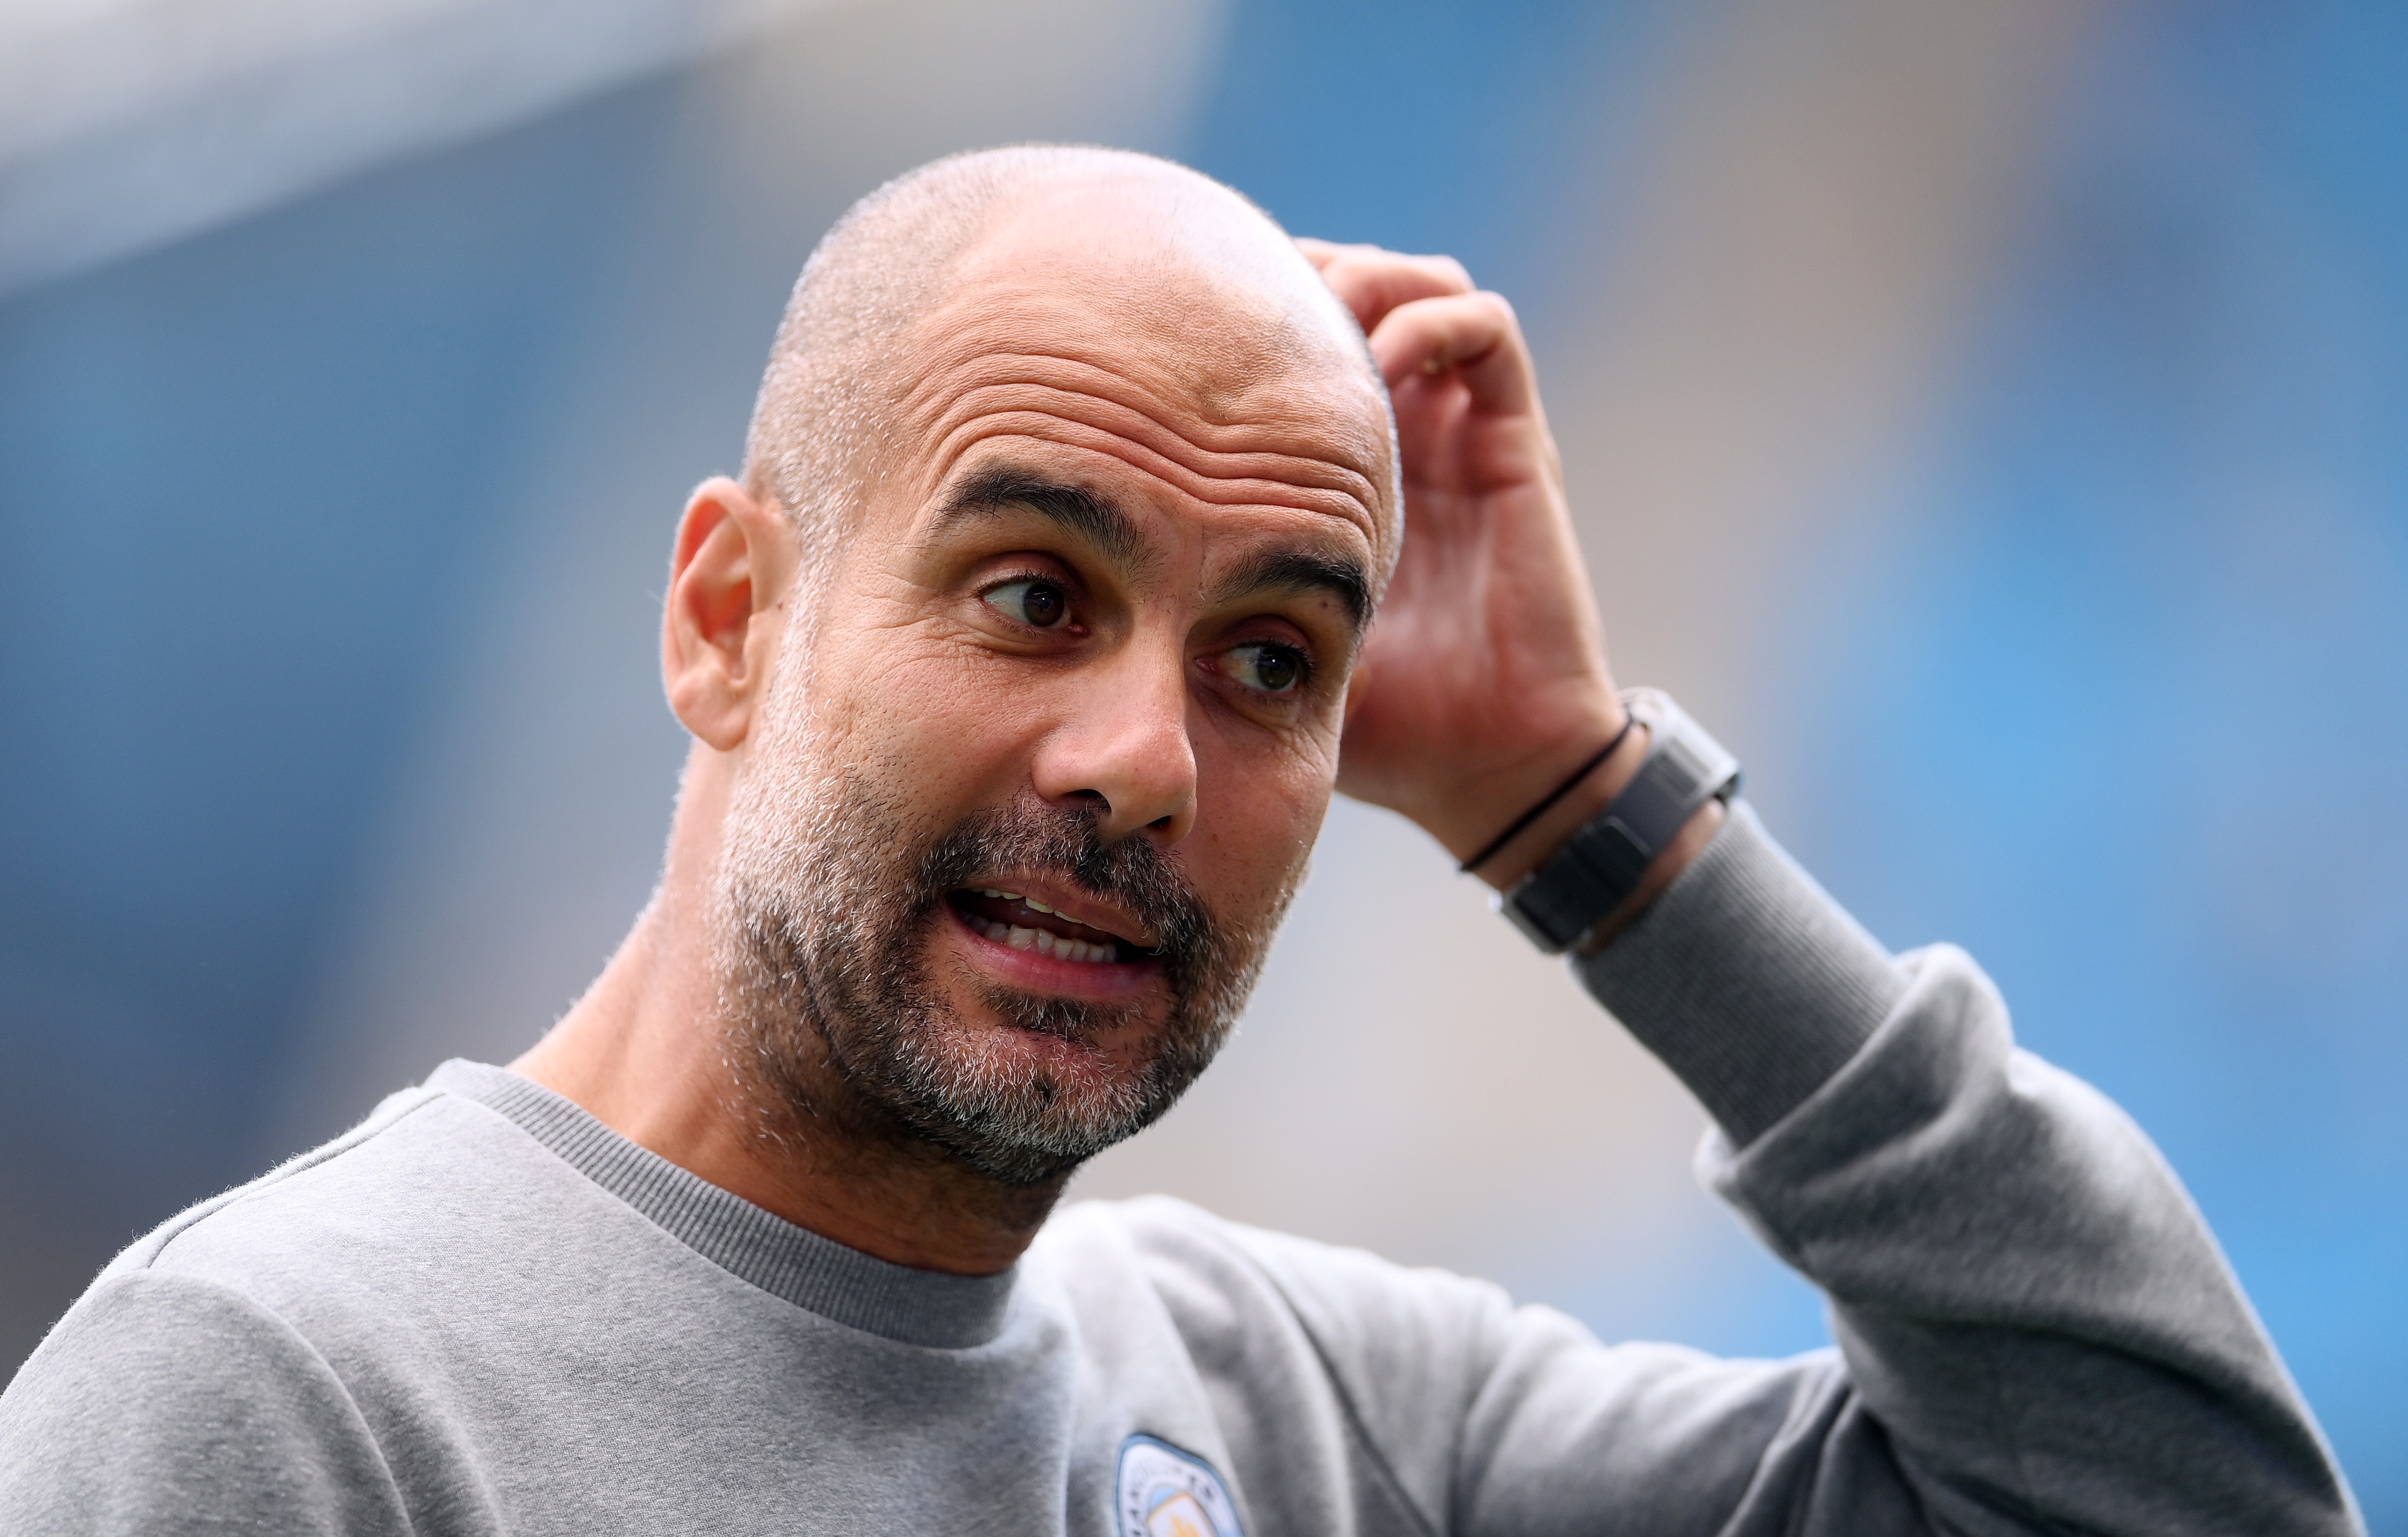 Pep Guardiola is looking forward to the challenge of facing three of Europe’s top teams in a week